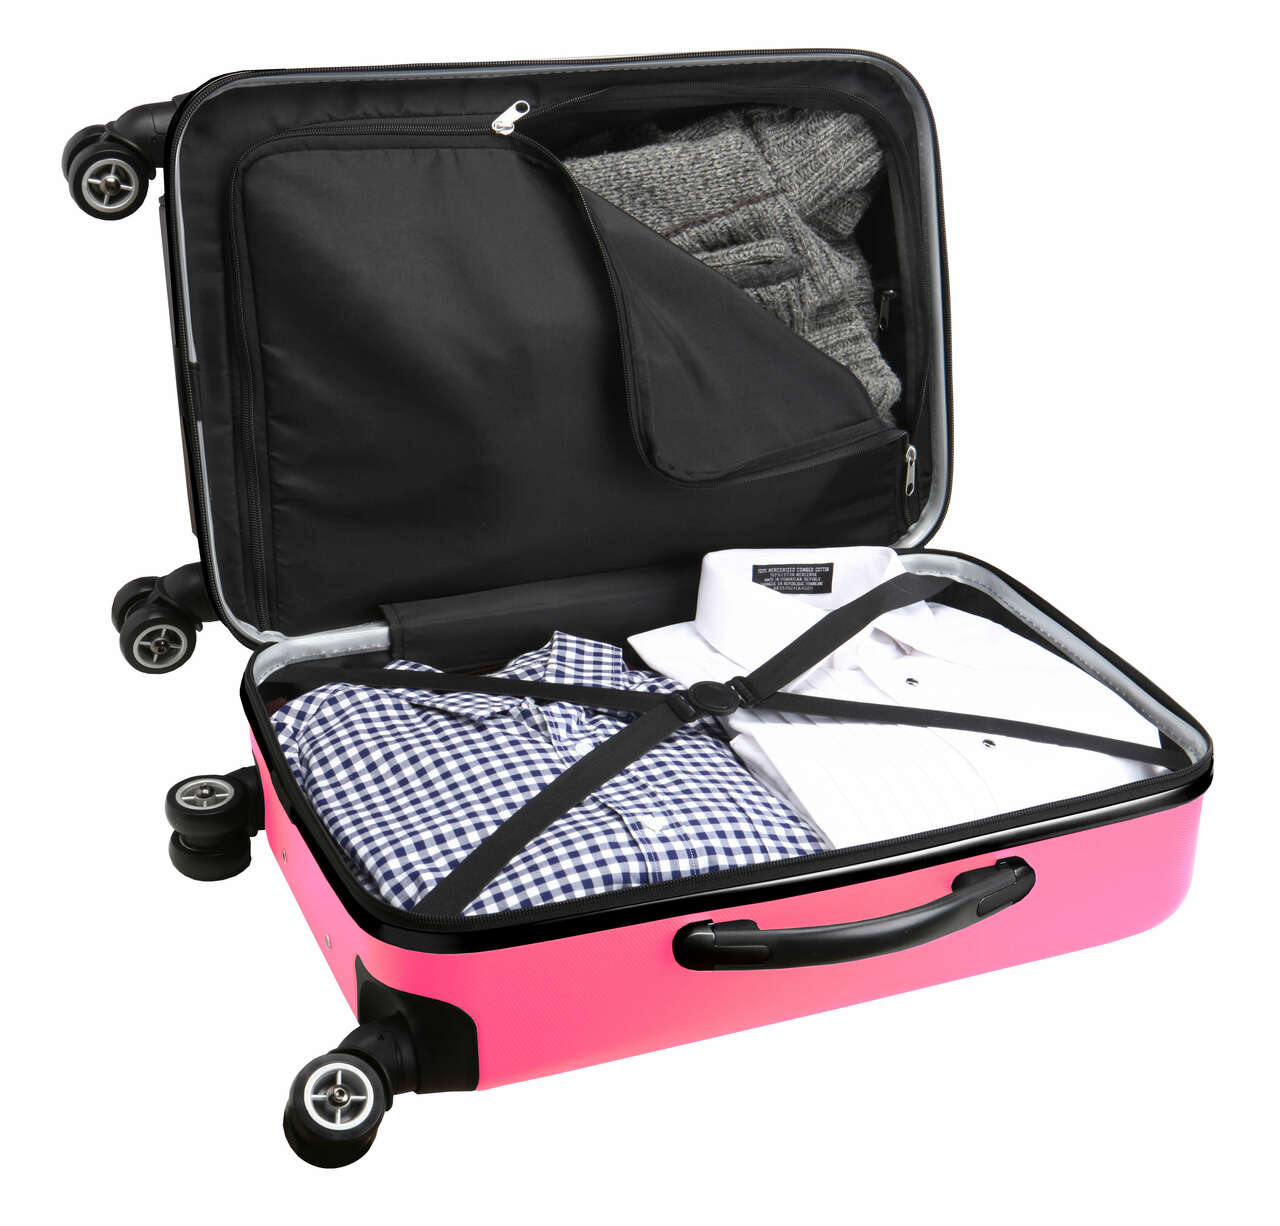 Pittsburgh Pirates 20" Pink Domestic Carry-on Spinner